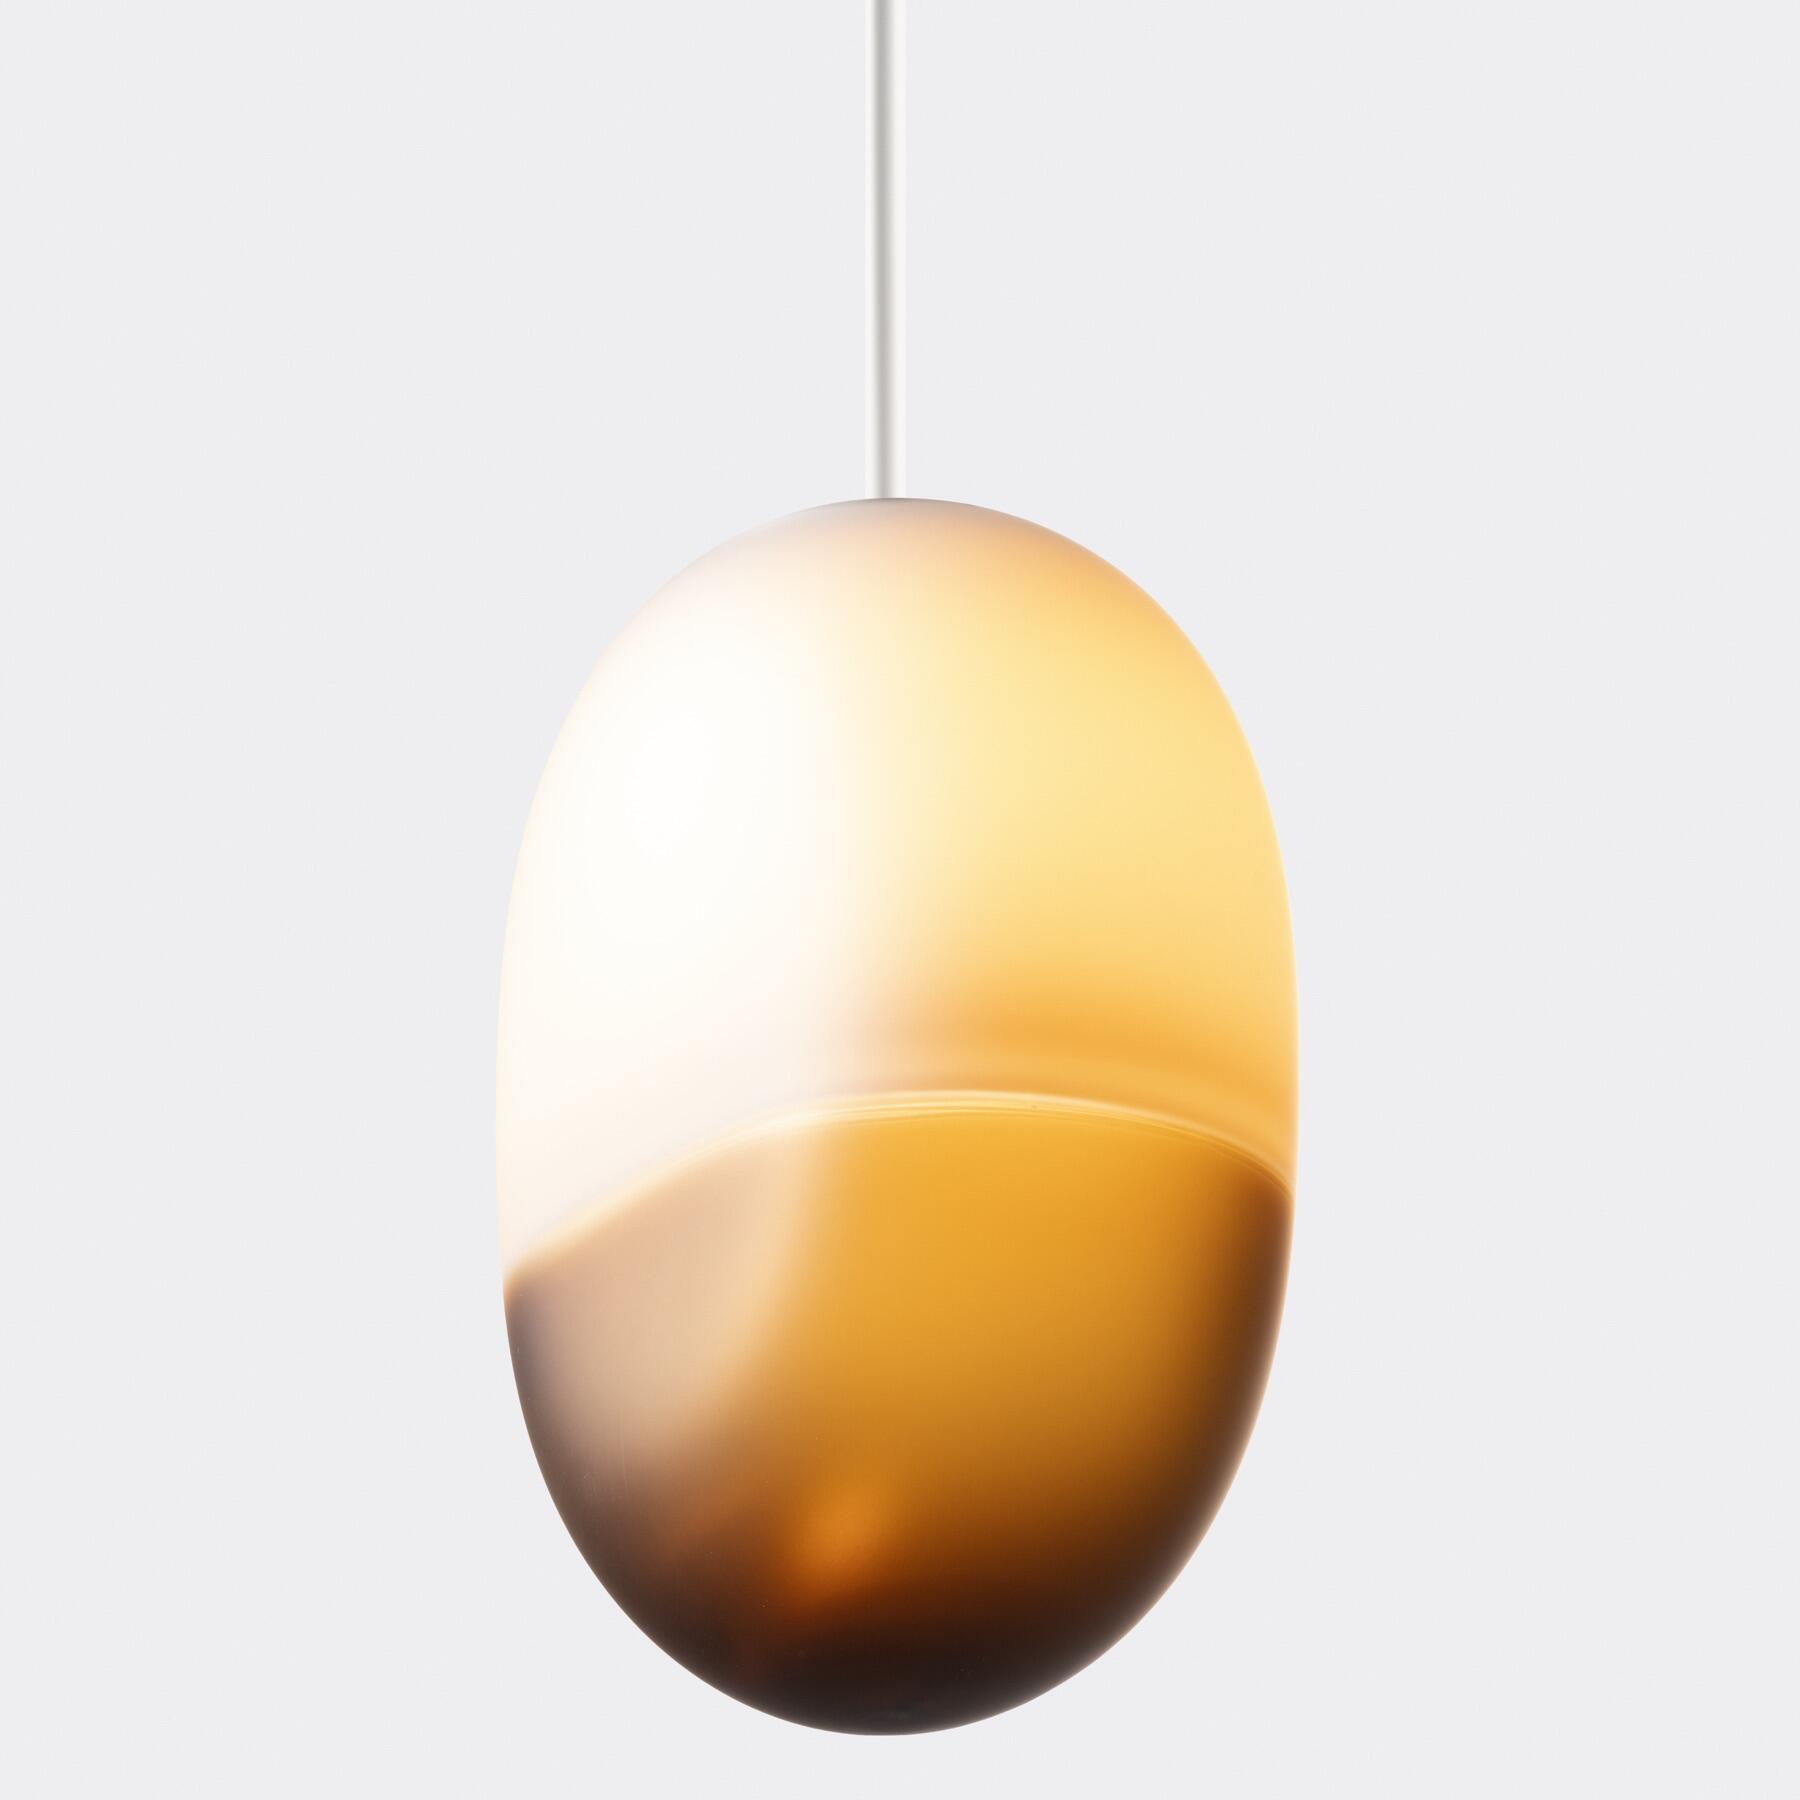 Pilule Satin Pendant, Blanc Lacquer, Satin Java and Old Gold Glass